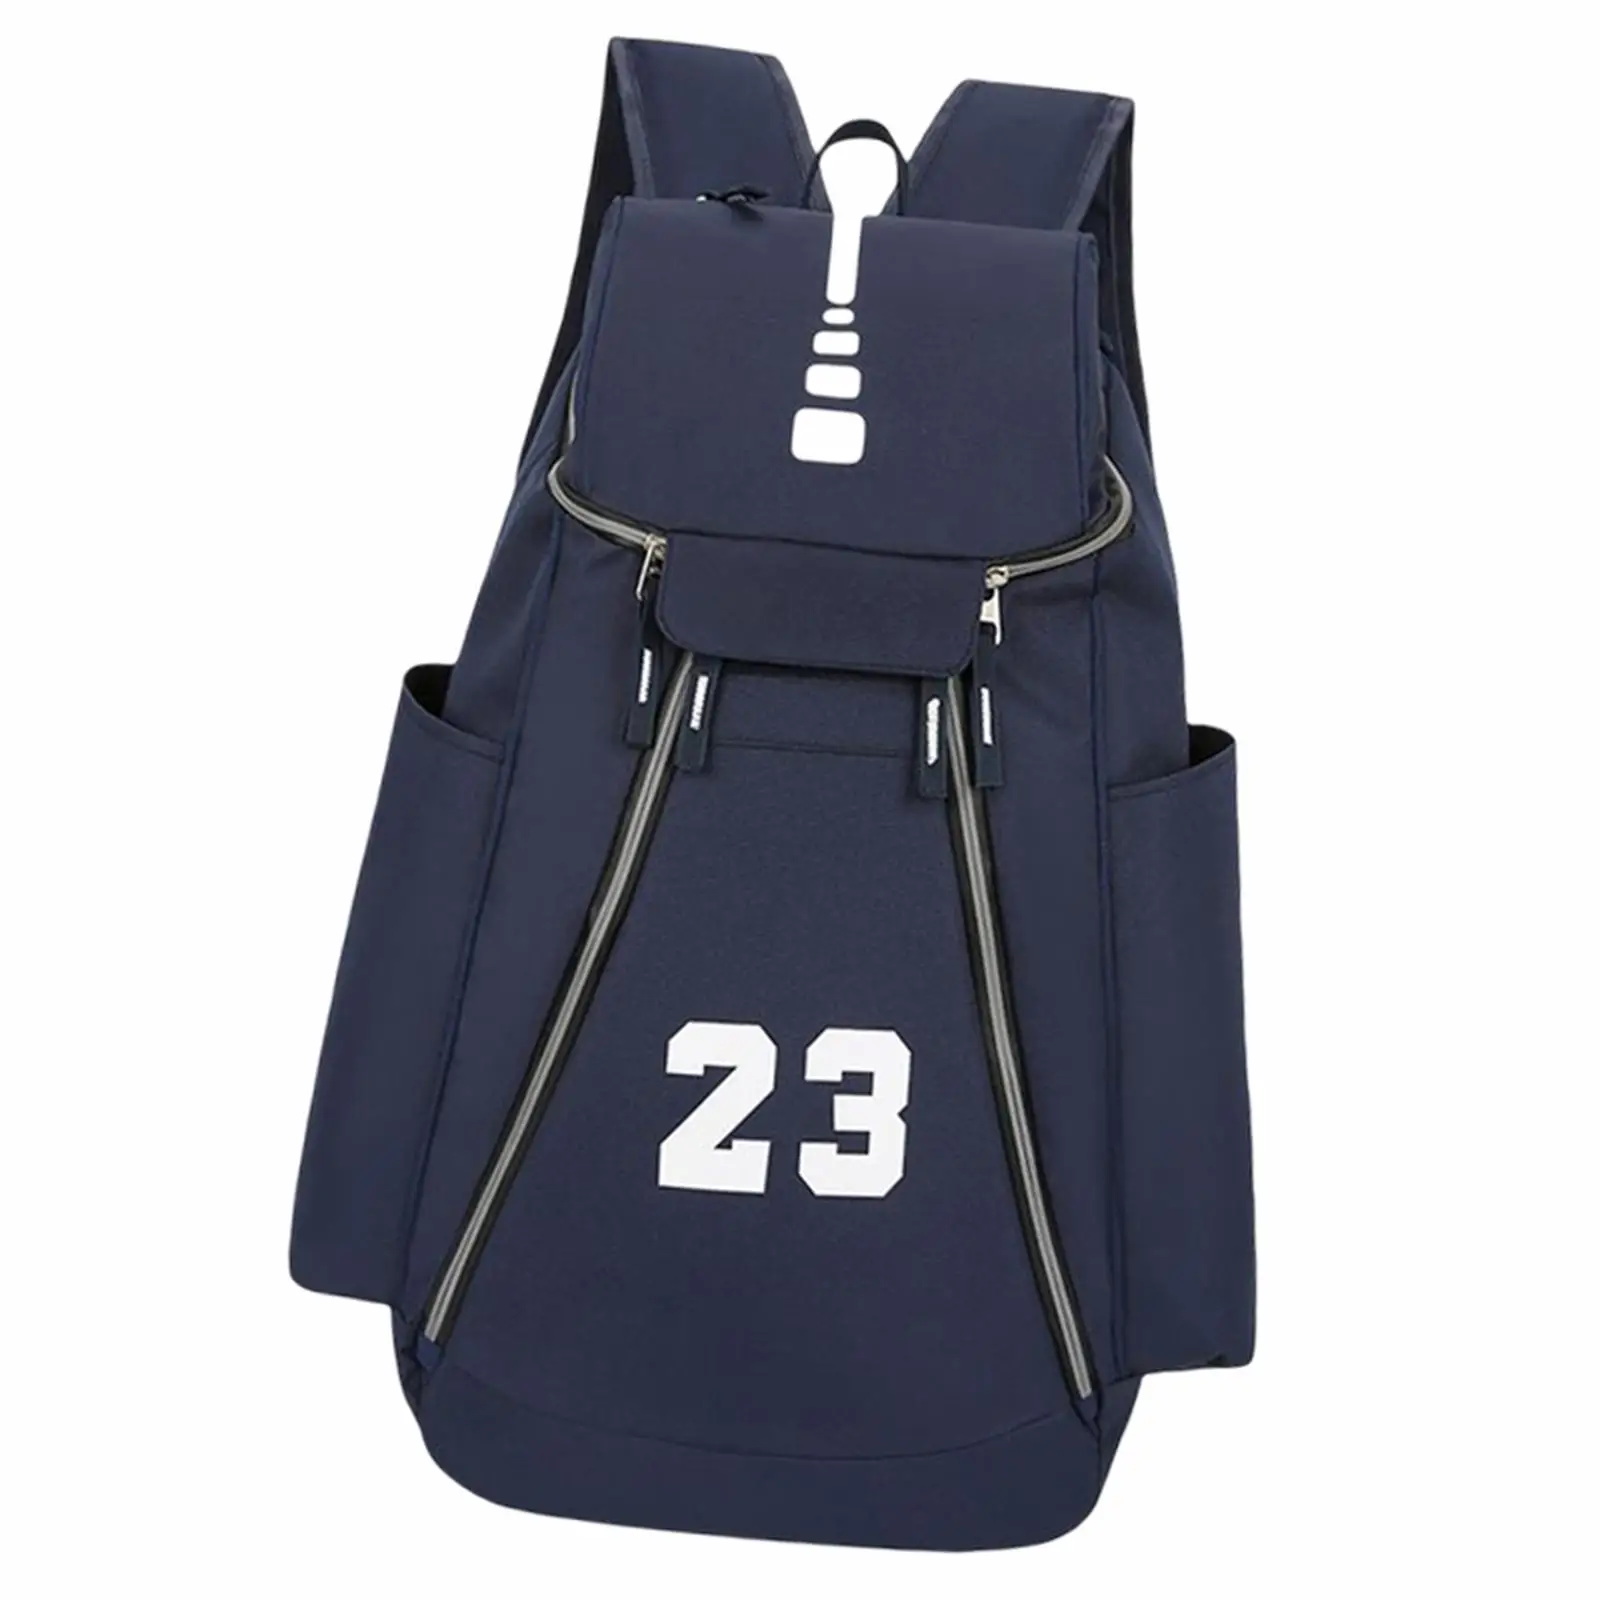 Basketball Backpack Rucksack Daypack Sport Backpack fitness Outdoor Volleyball